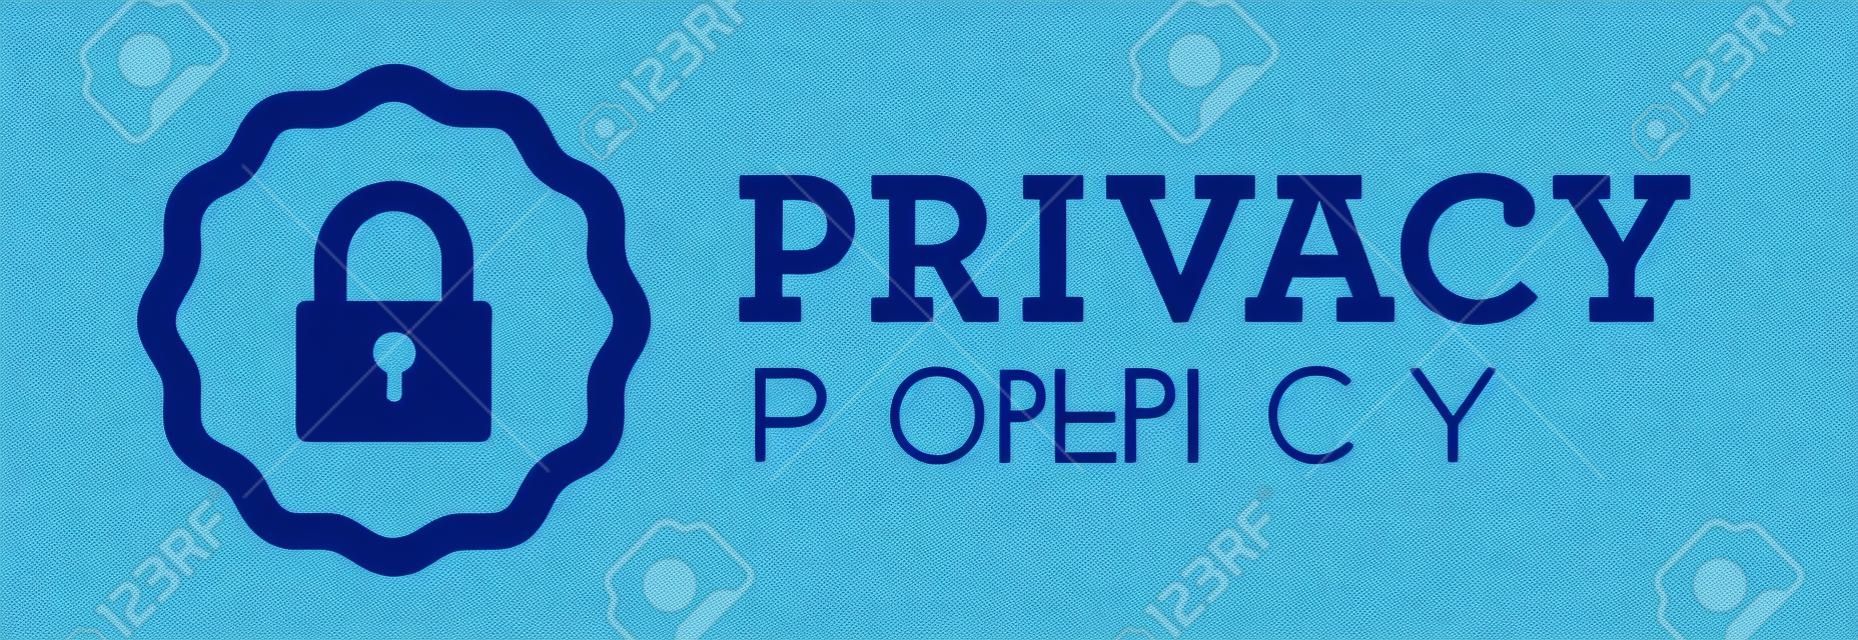 Privacy Policy Banner or Badge for Website